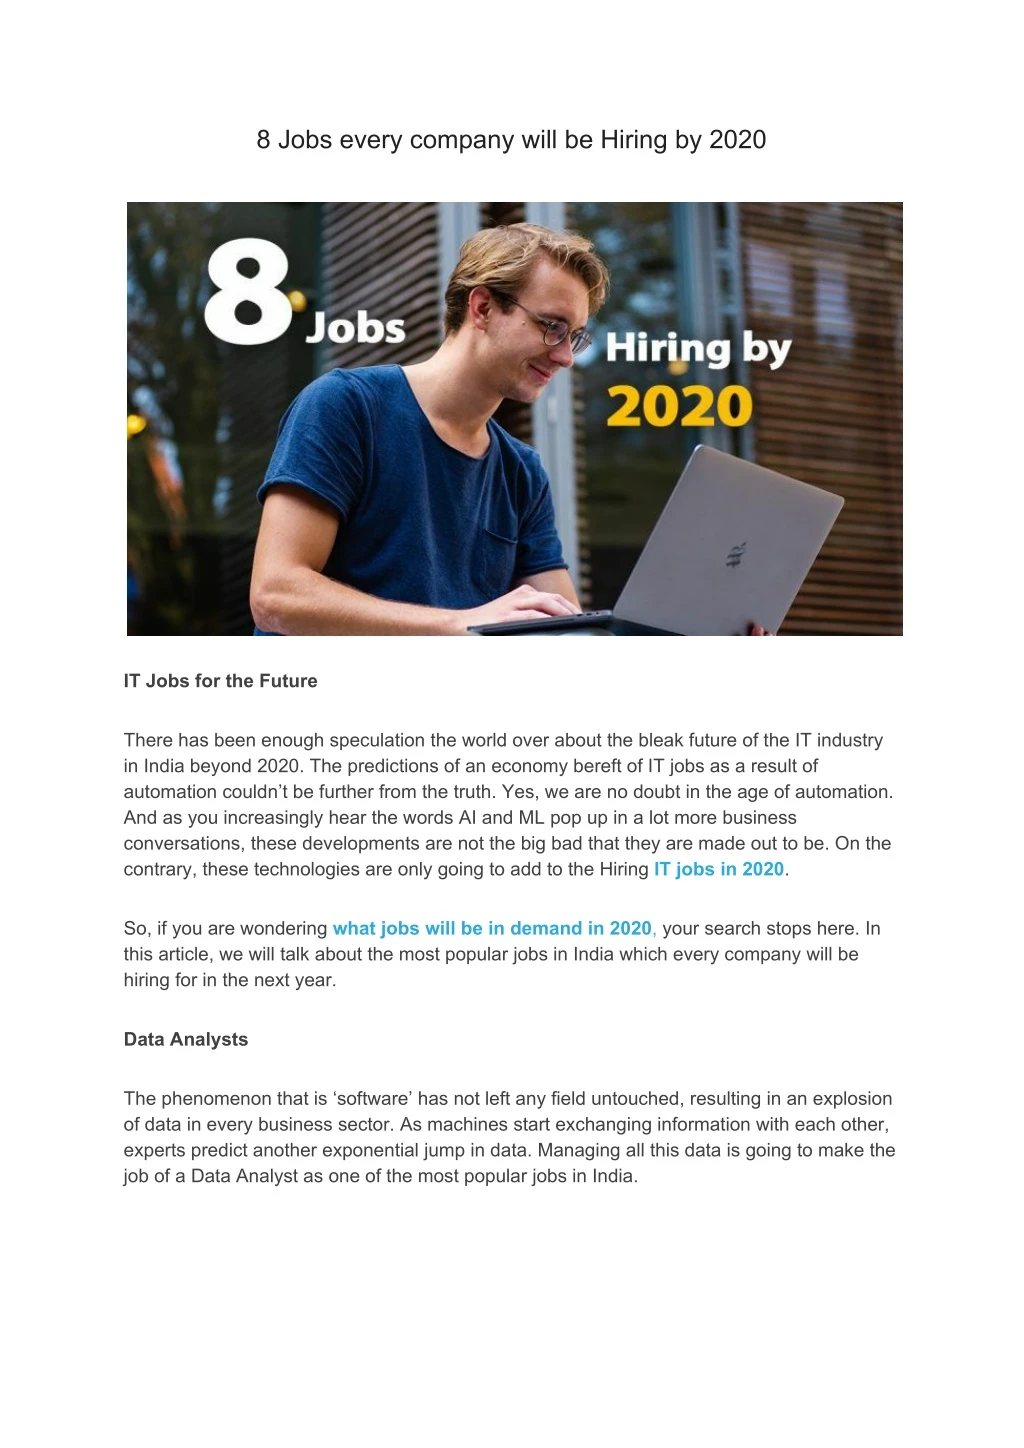 8 jobs every company will be hiring by 2020